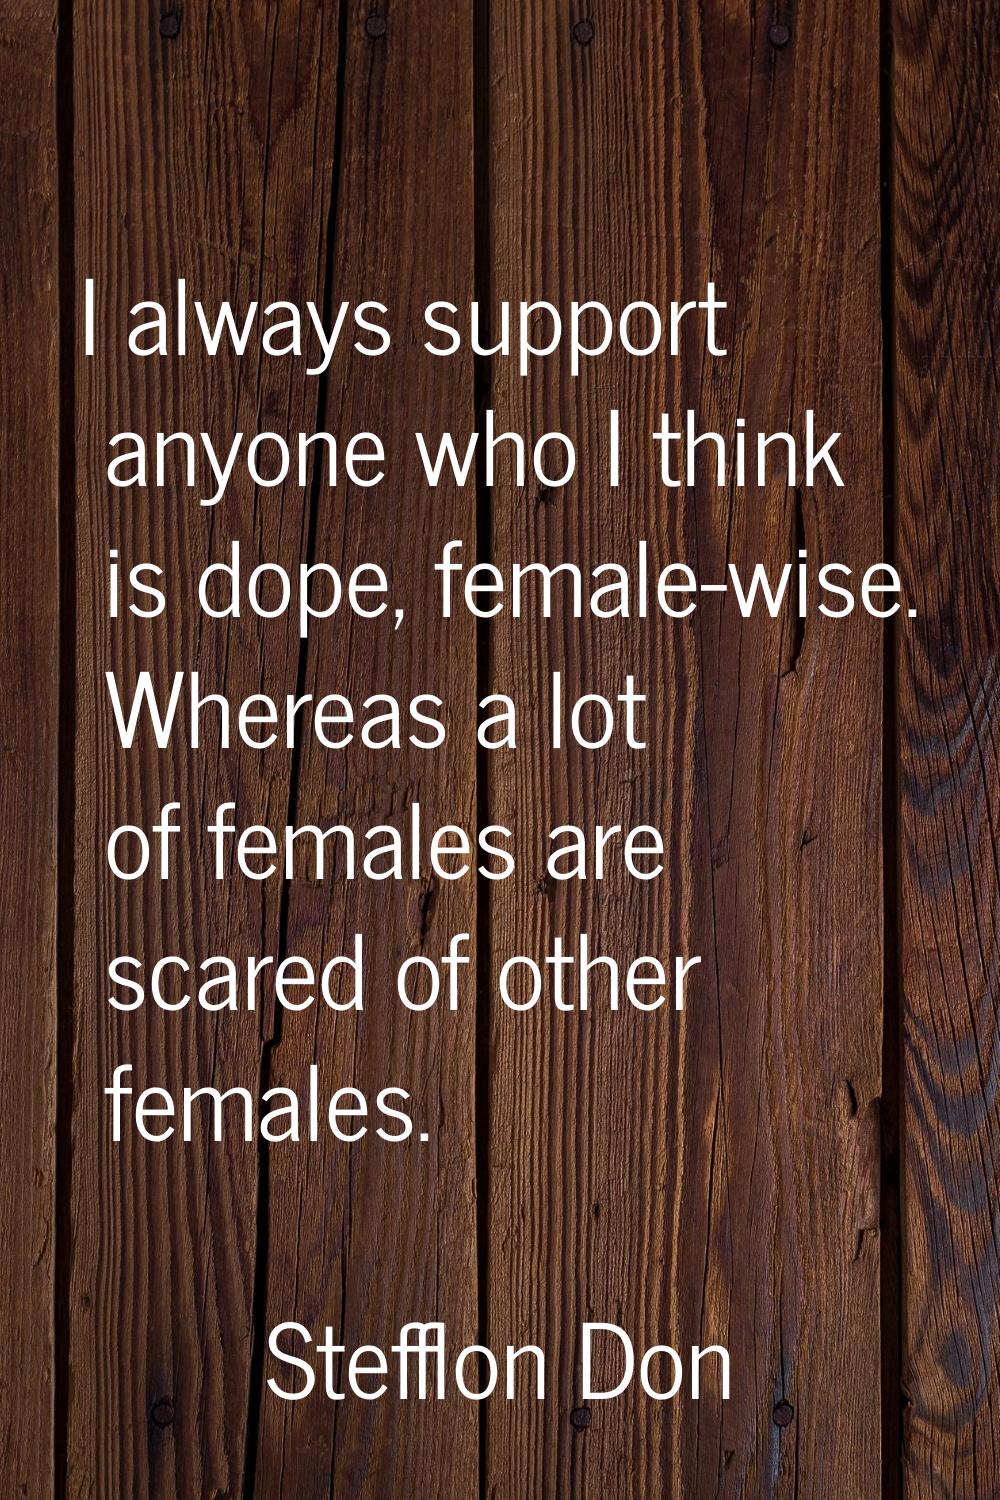 I always support anyone who I think is dope, female-wise. Whereas a lot of females are scared of ot